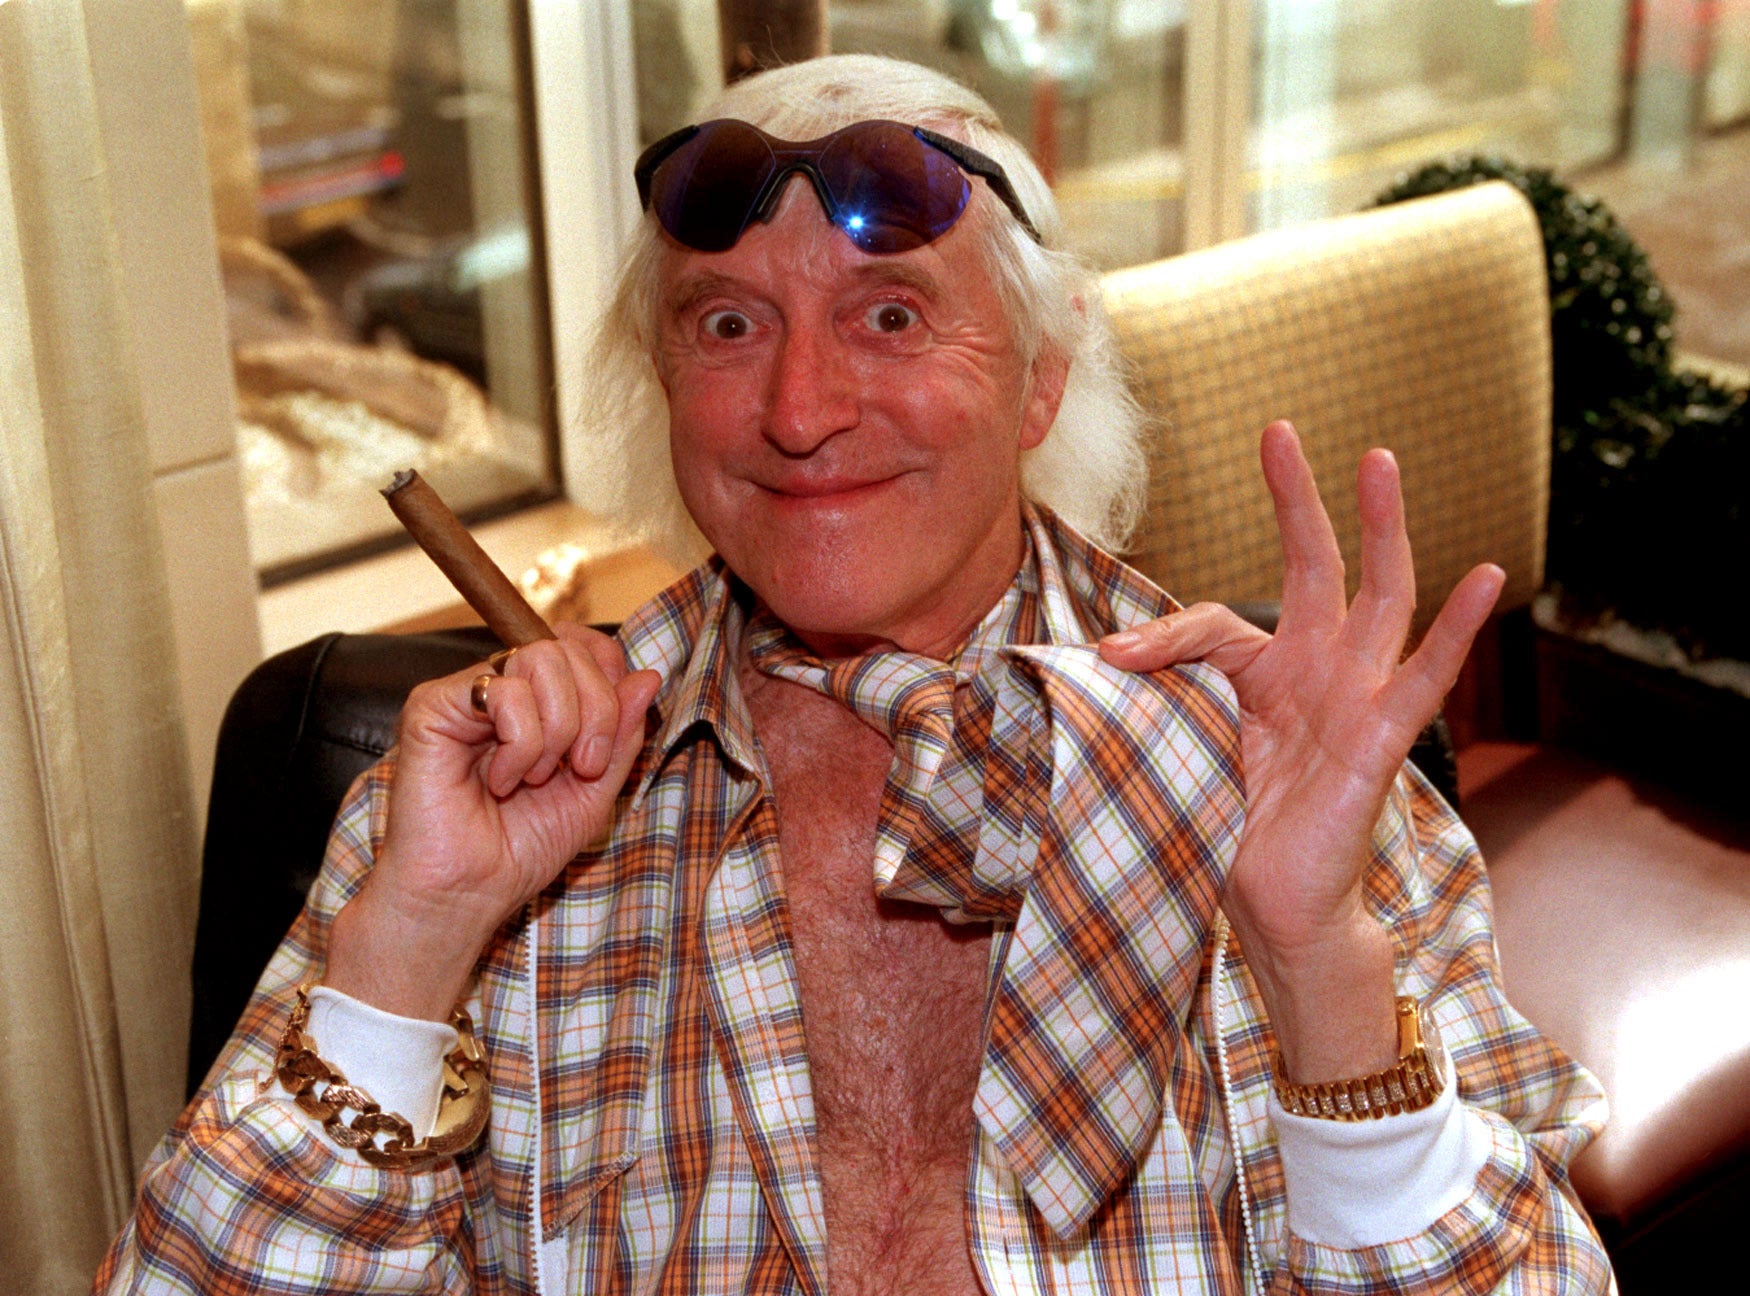 A new Netflix documentary delves into archive footage covering a 50-year period to consider how Jimmy Savile got away with his crimes as a prolific sex offender (Peter Jordan/PA)